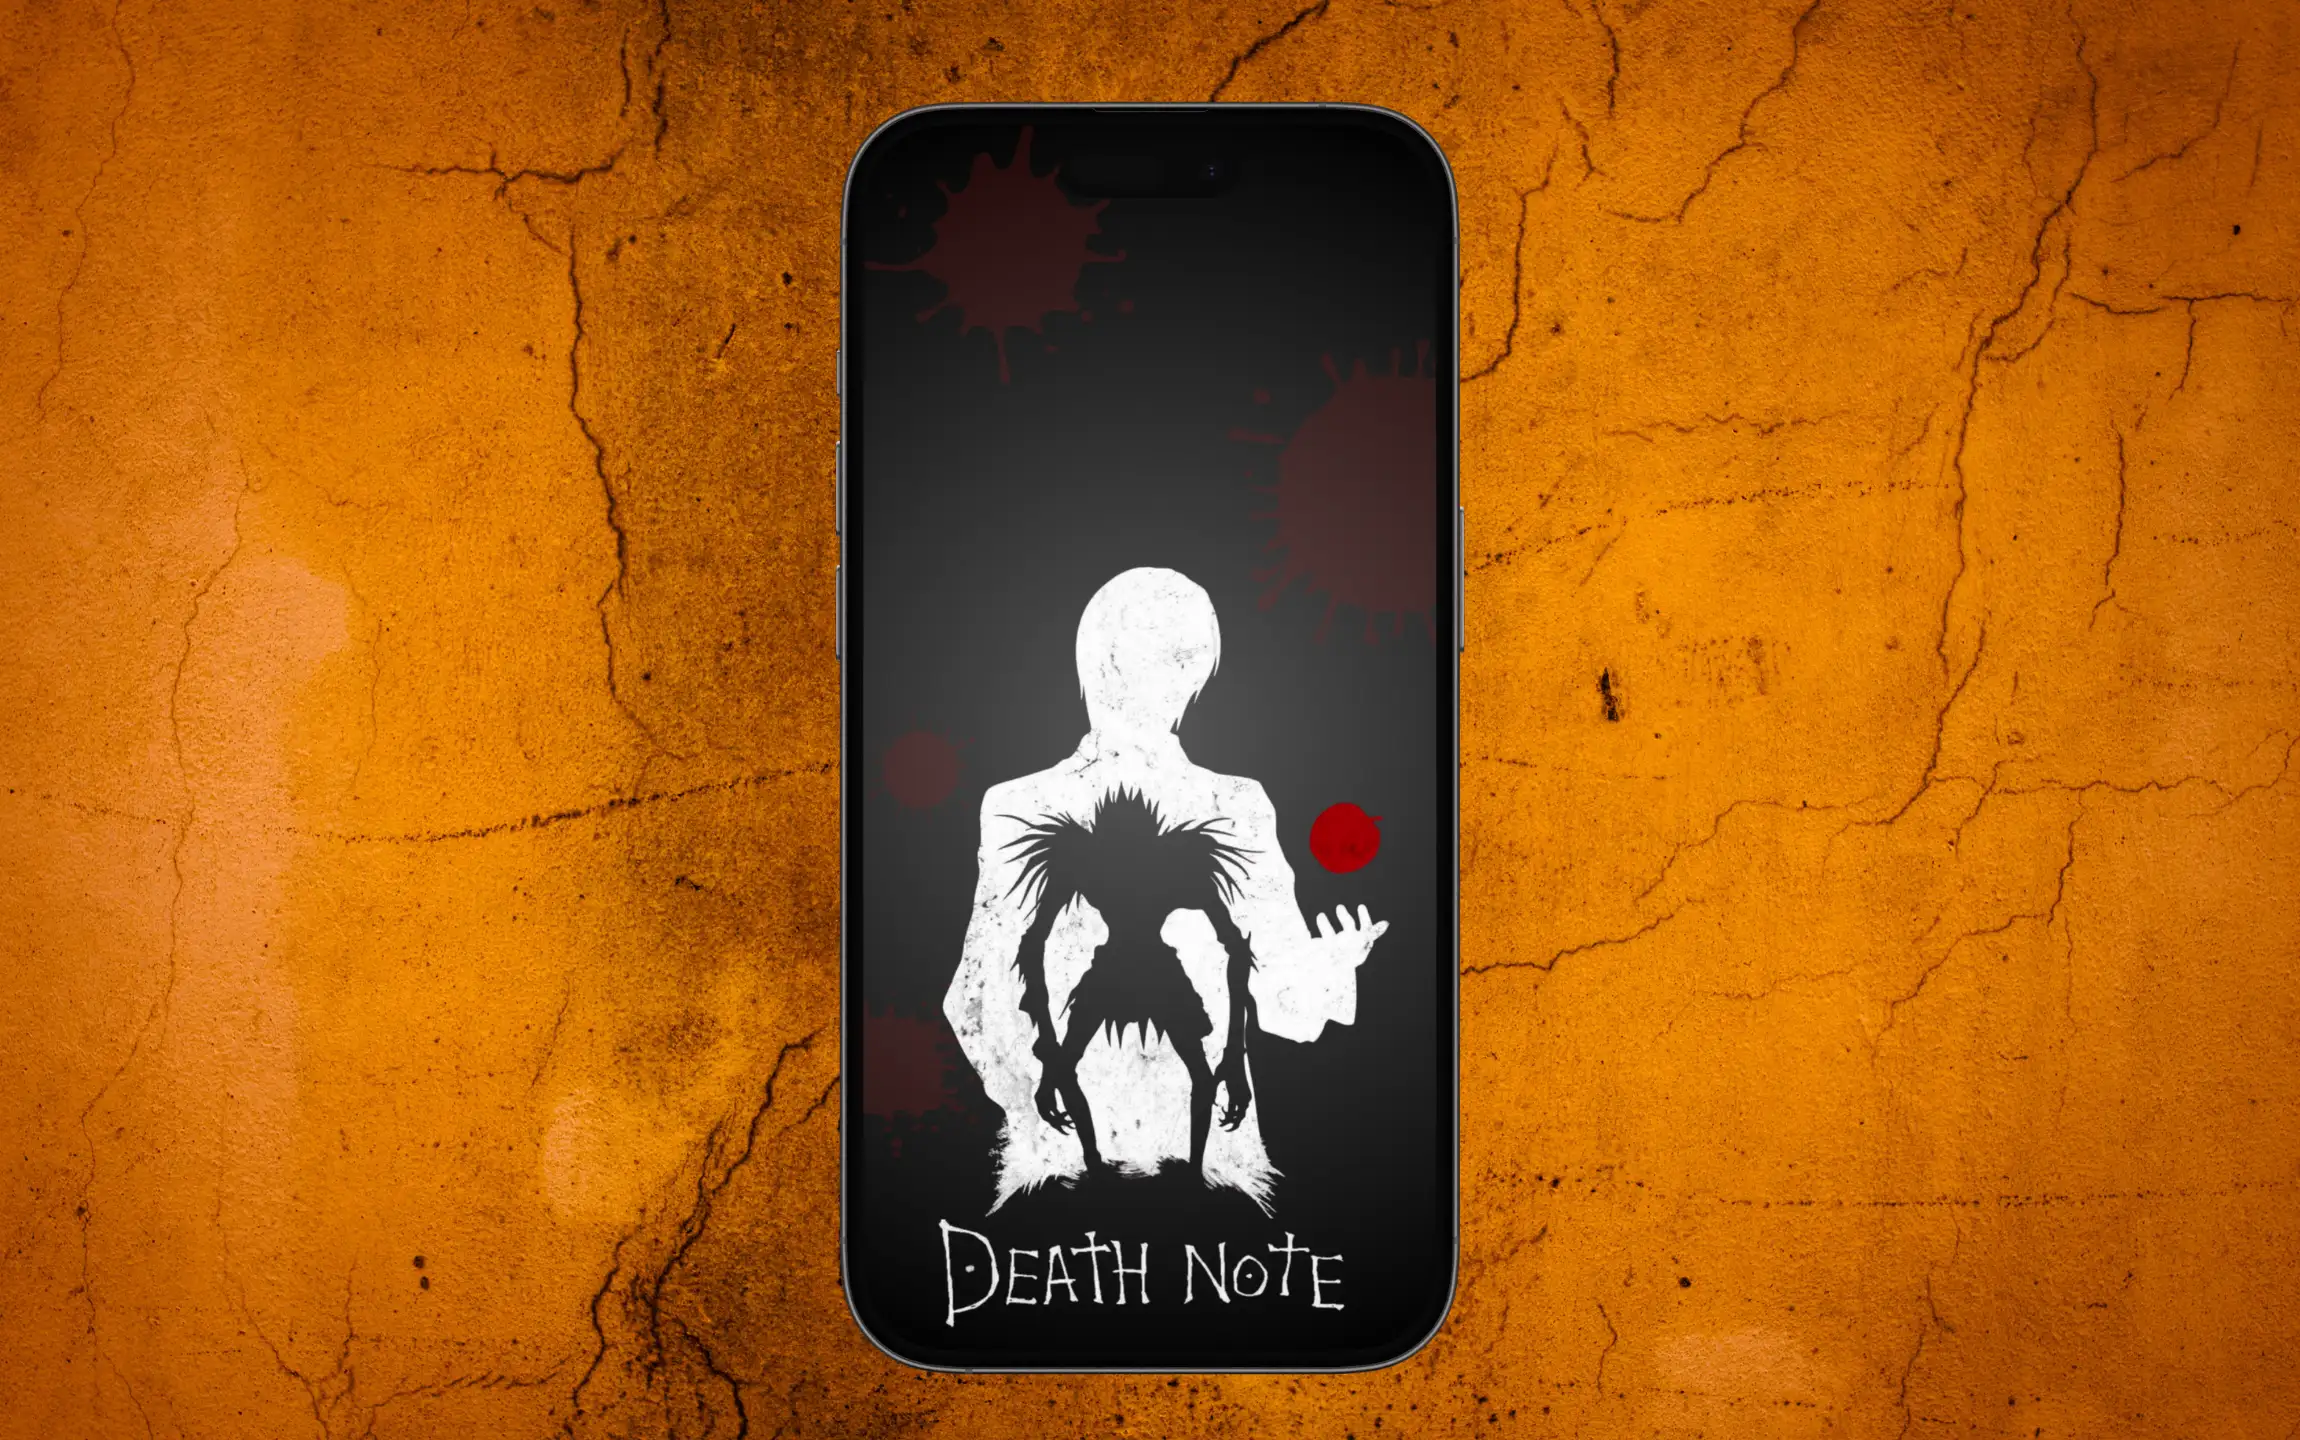 Death Note anime HD wallpaper for iPhone